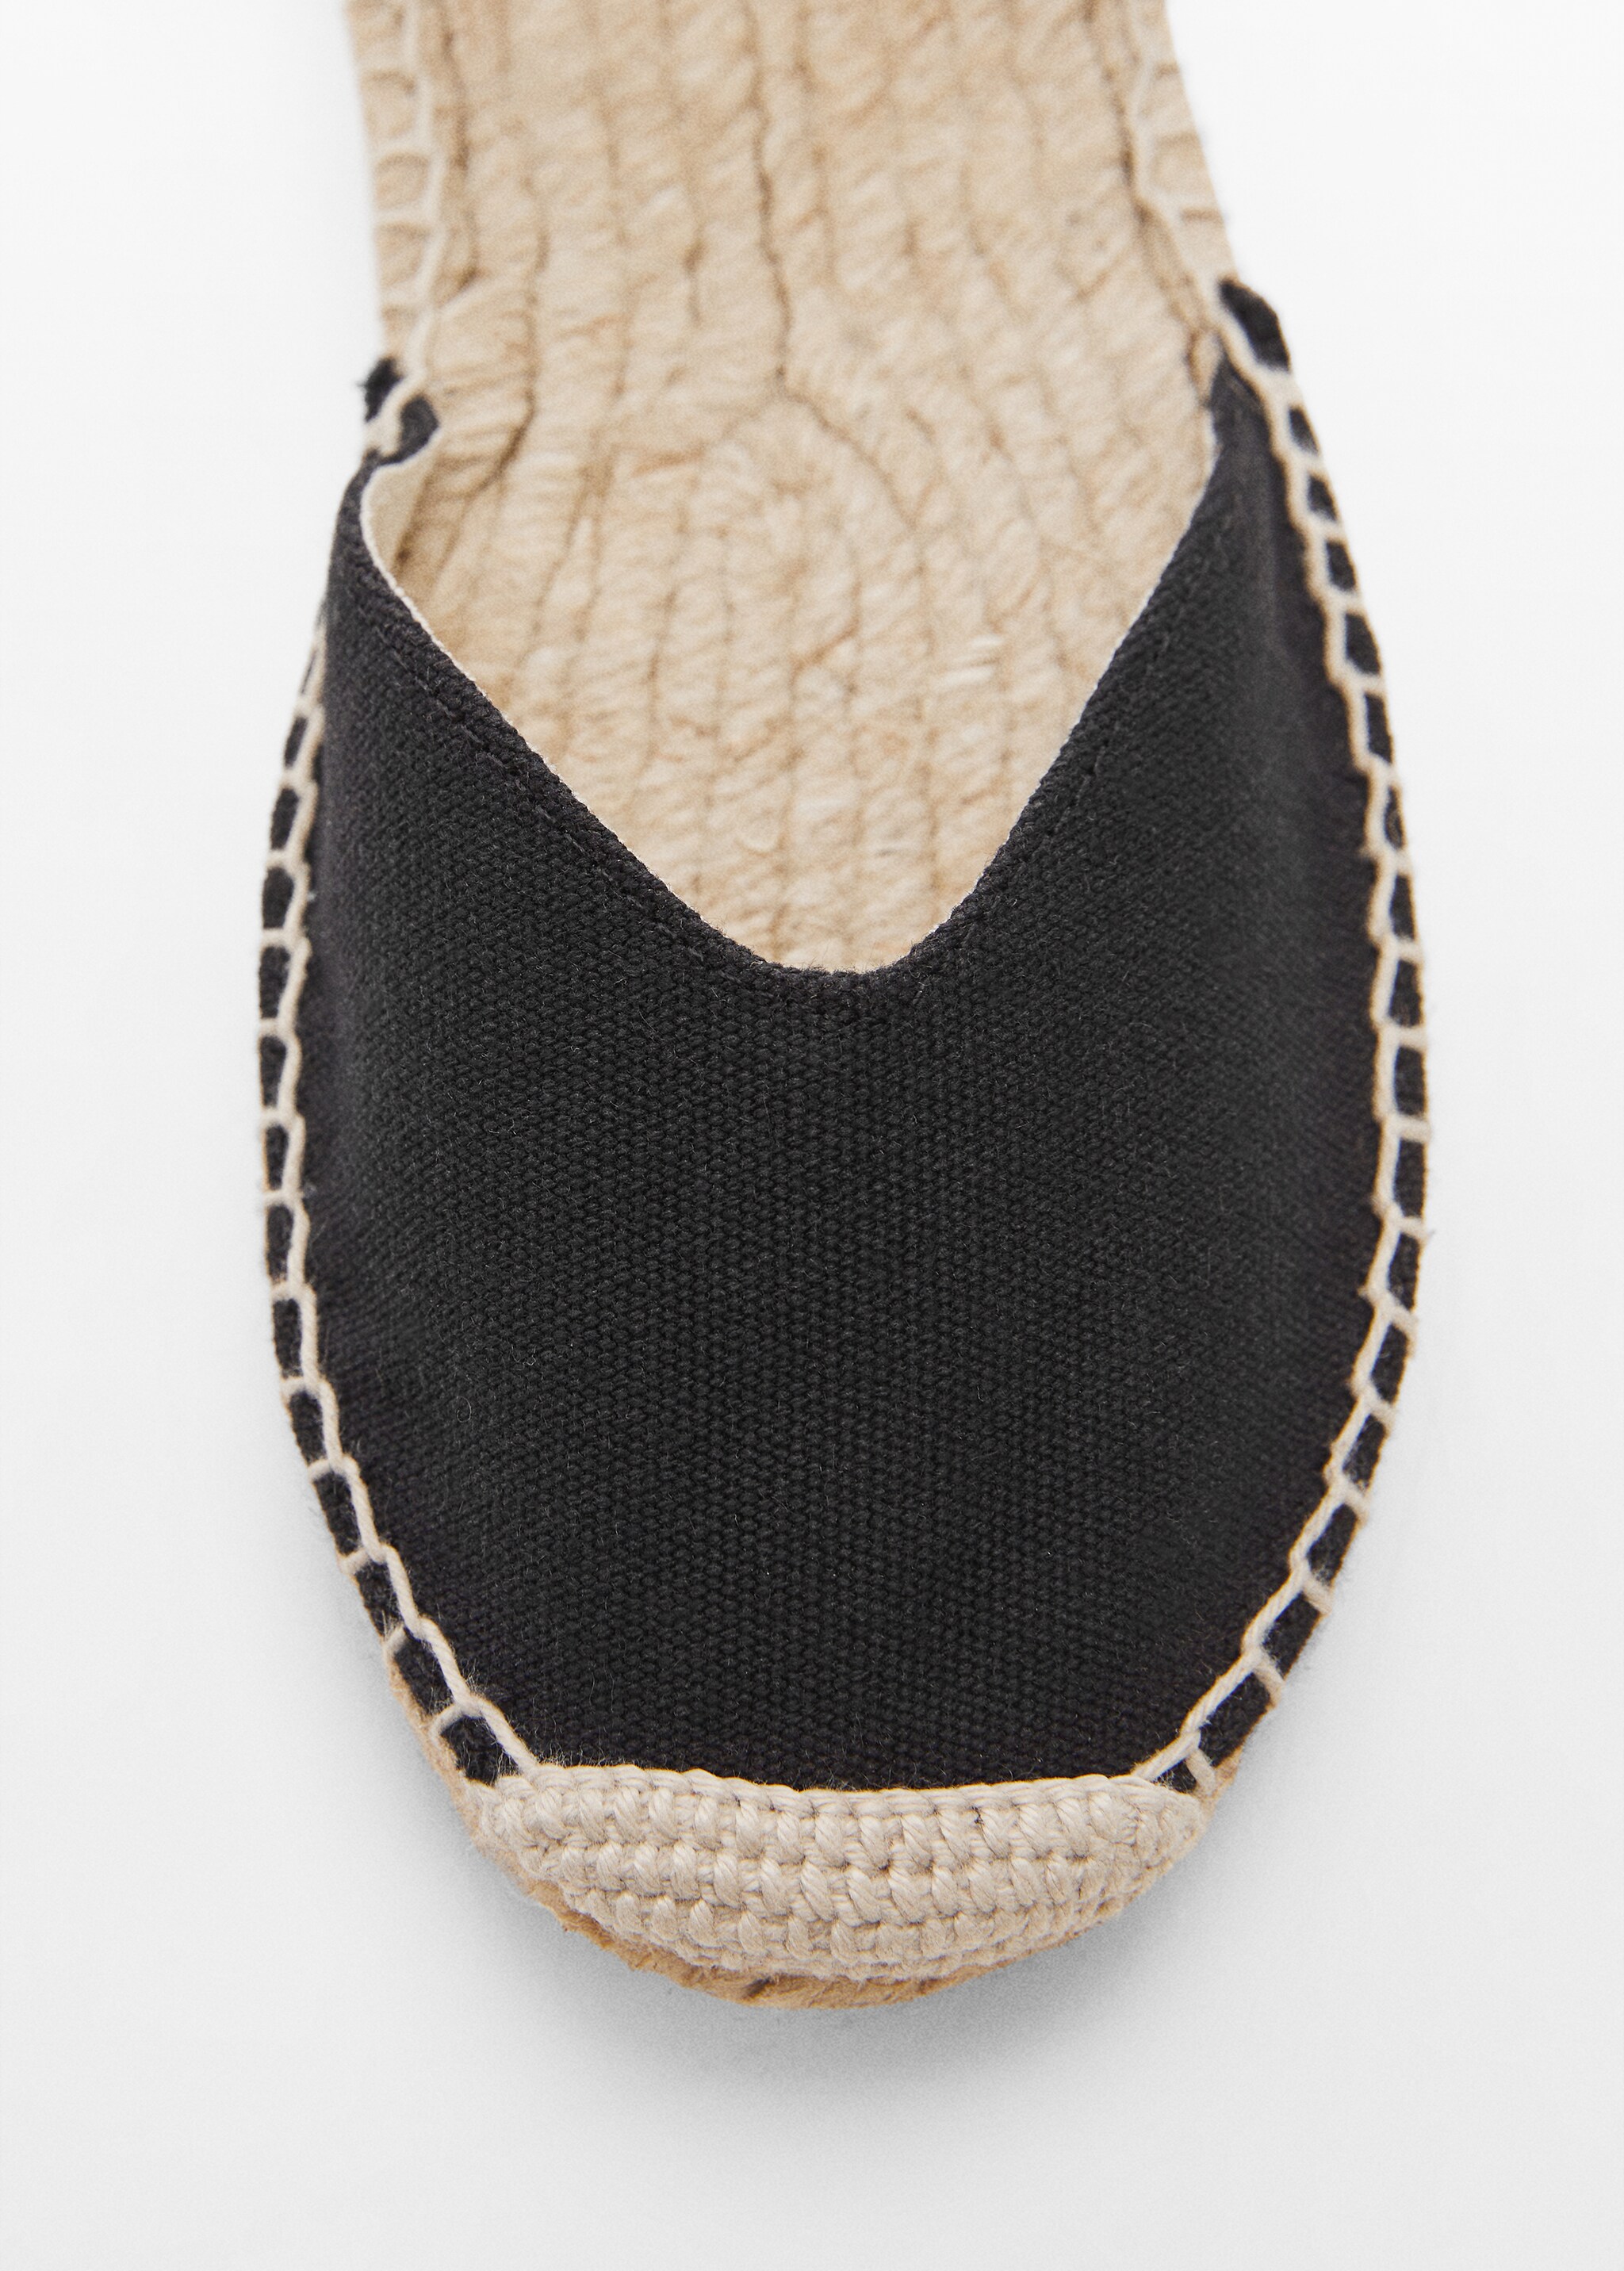 Suede espadrilles - Details of the article 2